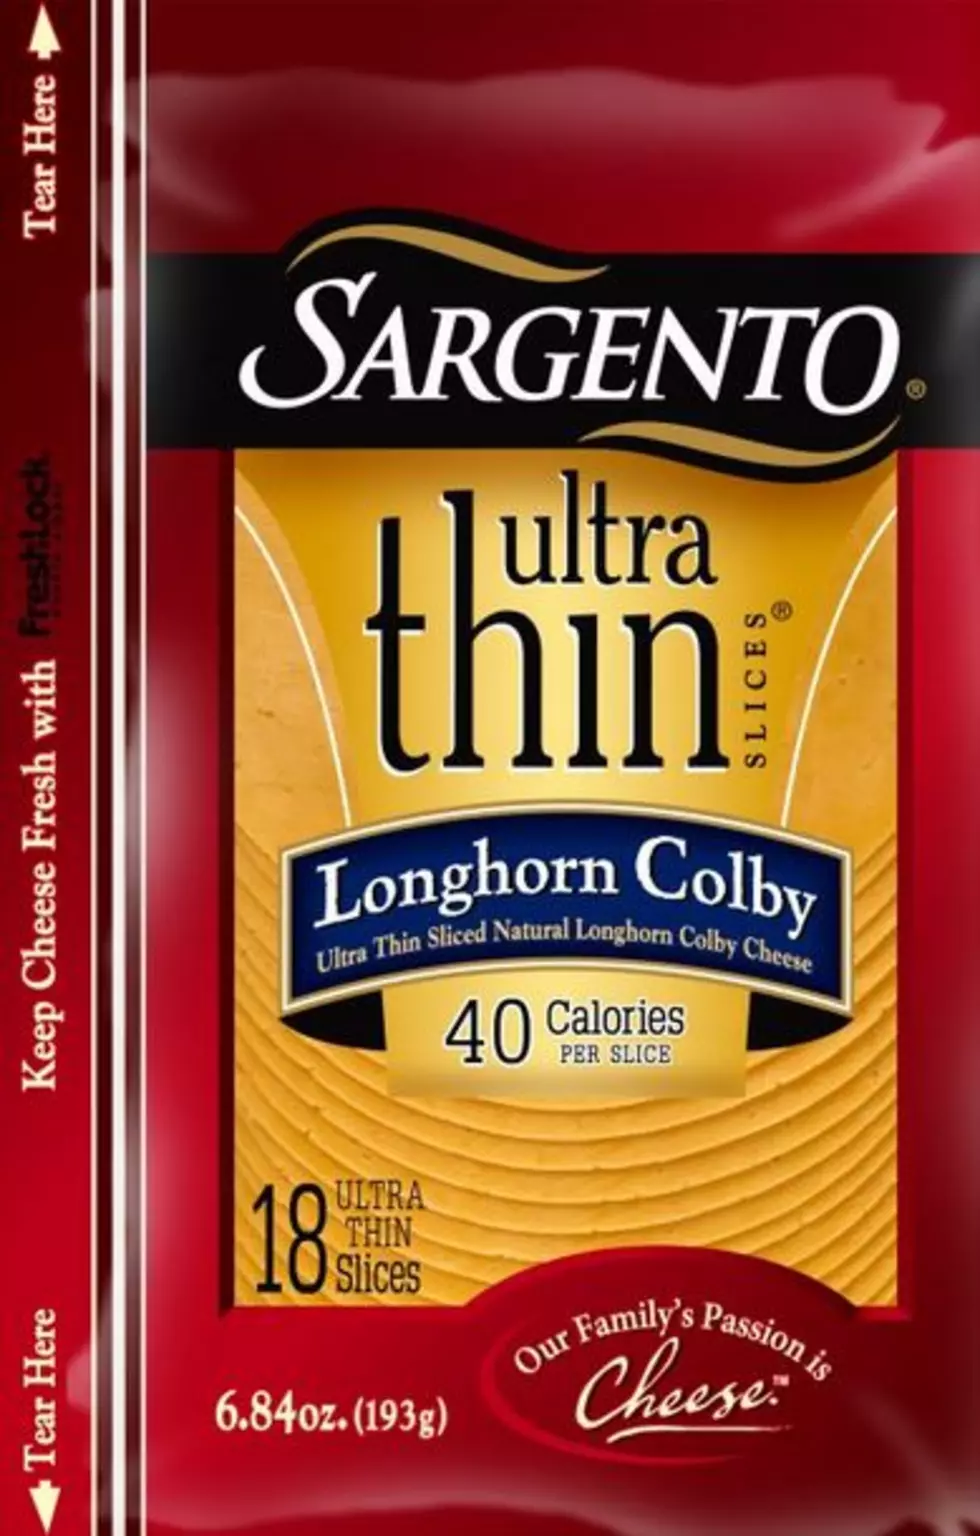 Sargento Recalls Cheese Products